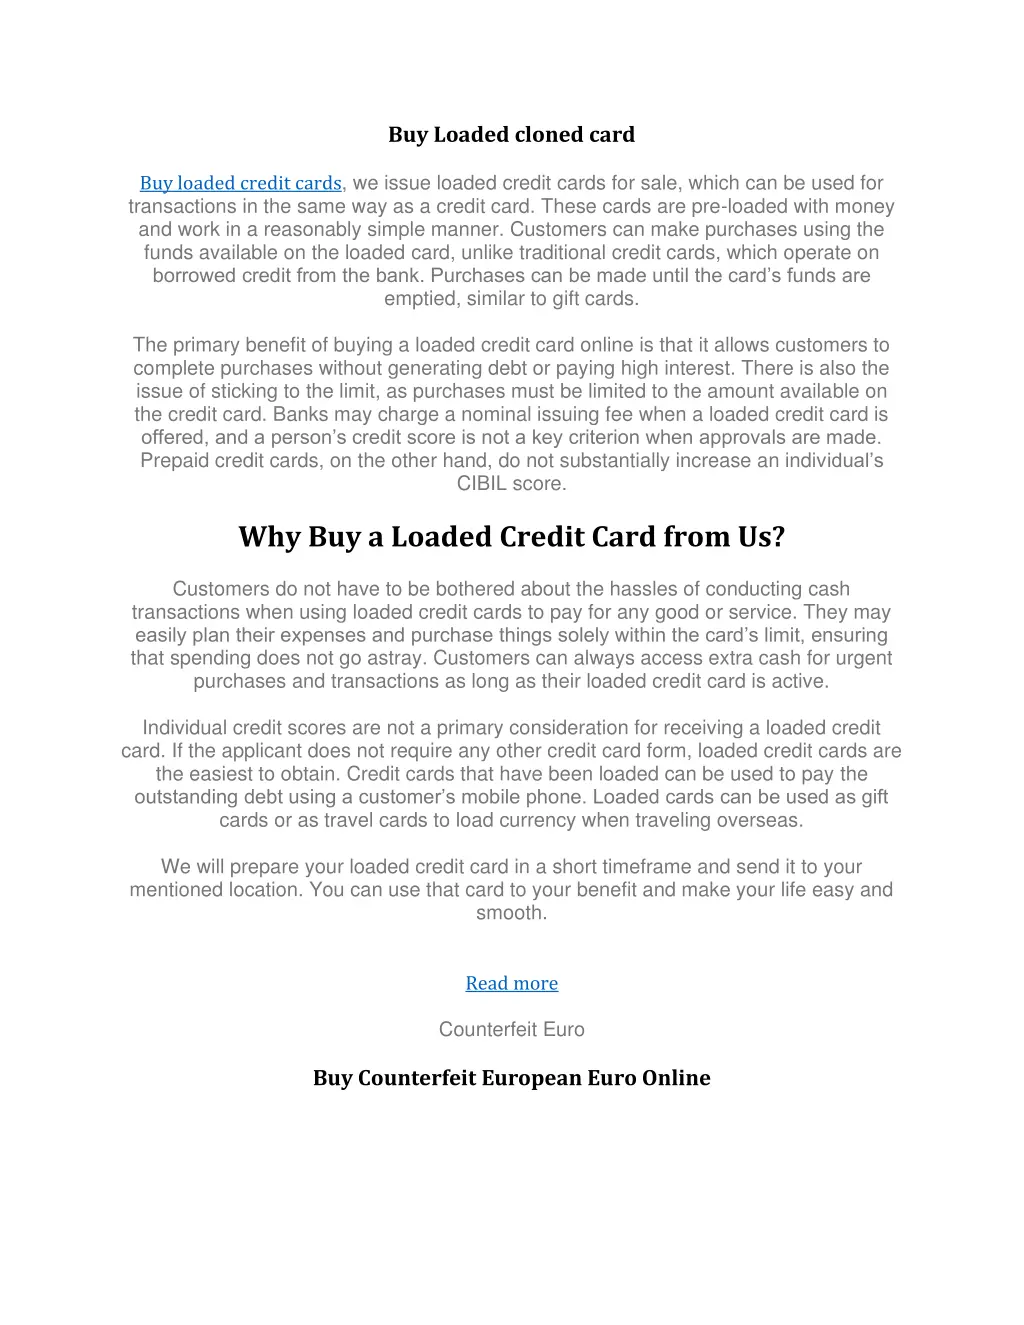 buy loaded cloned card